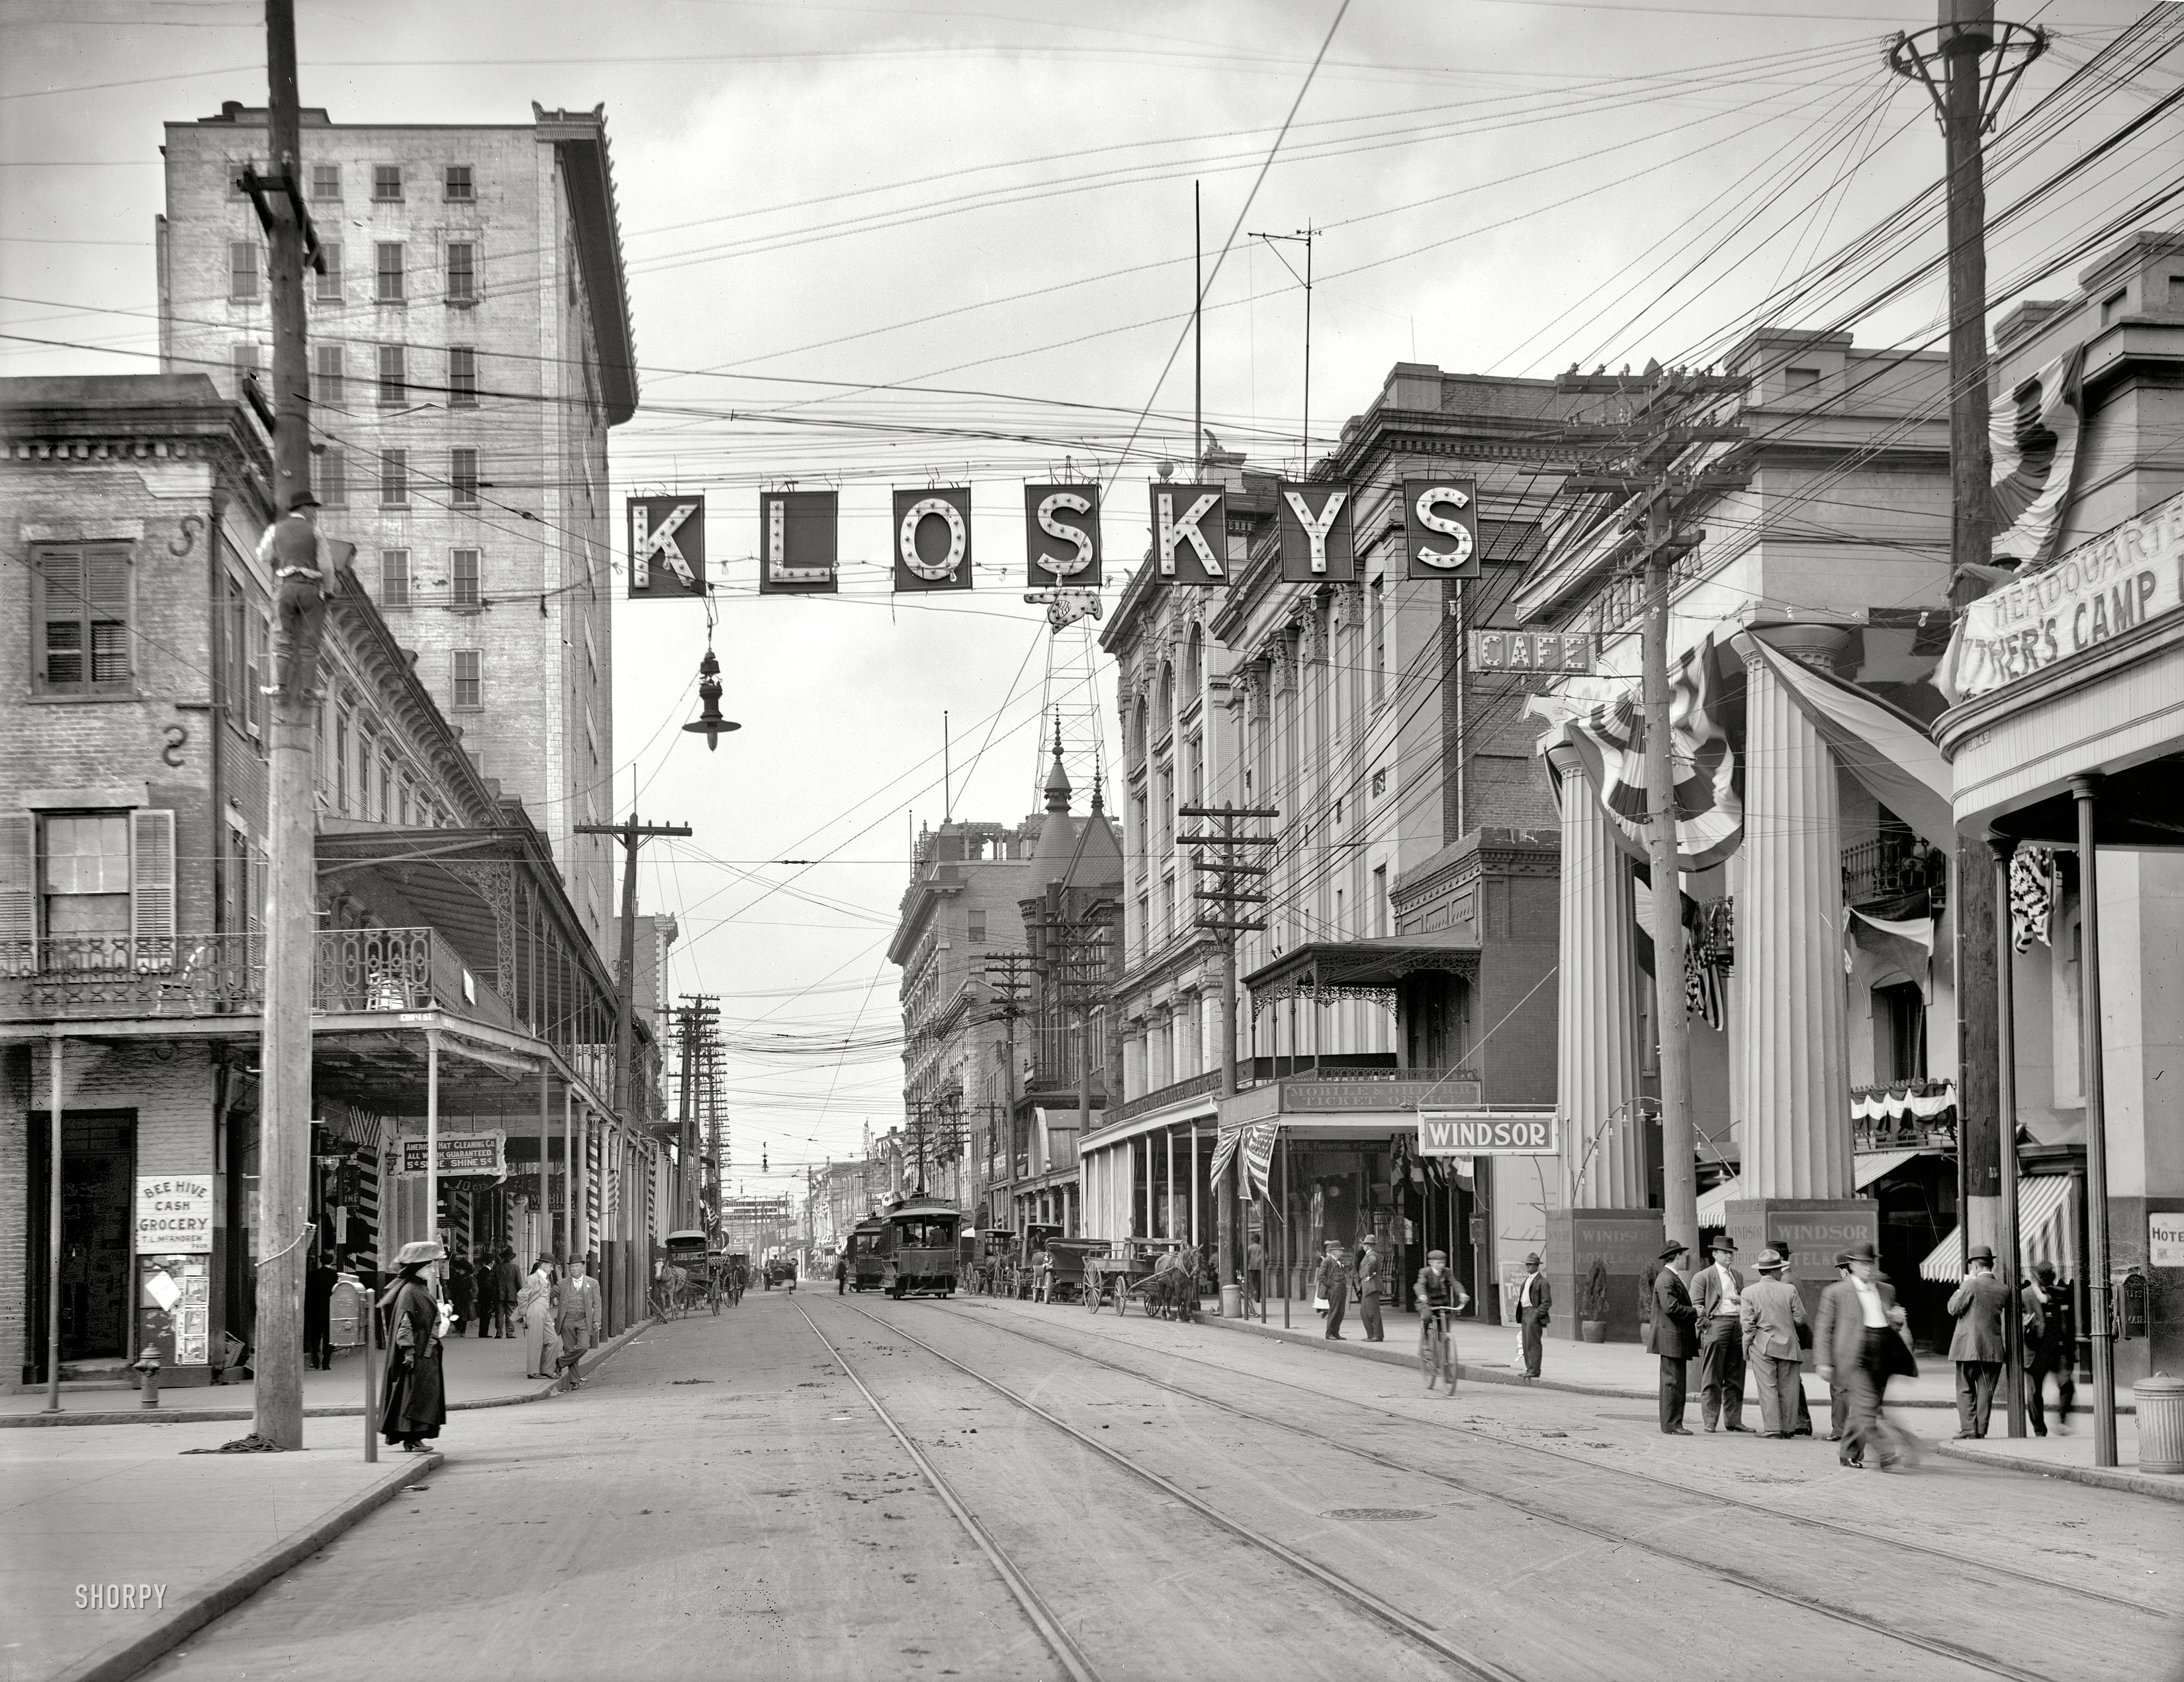 Mobile, Alabama, circa 1910. "Royal Street looking north." Points of interest include a lineman up a pole and the fickle finger of retail. View full size.